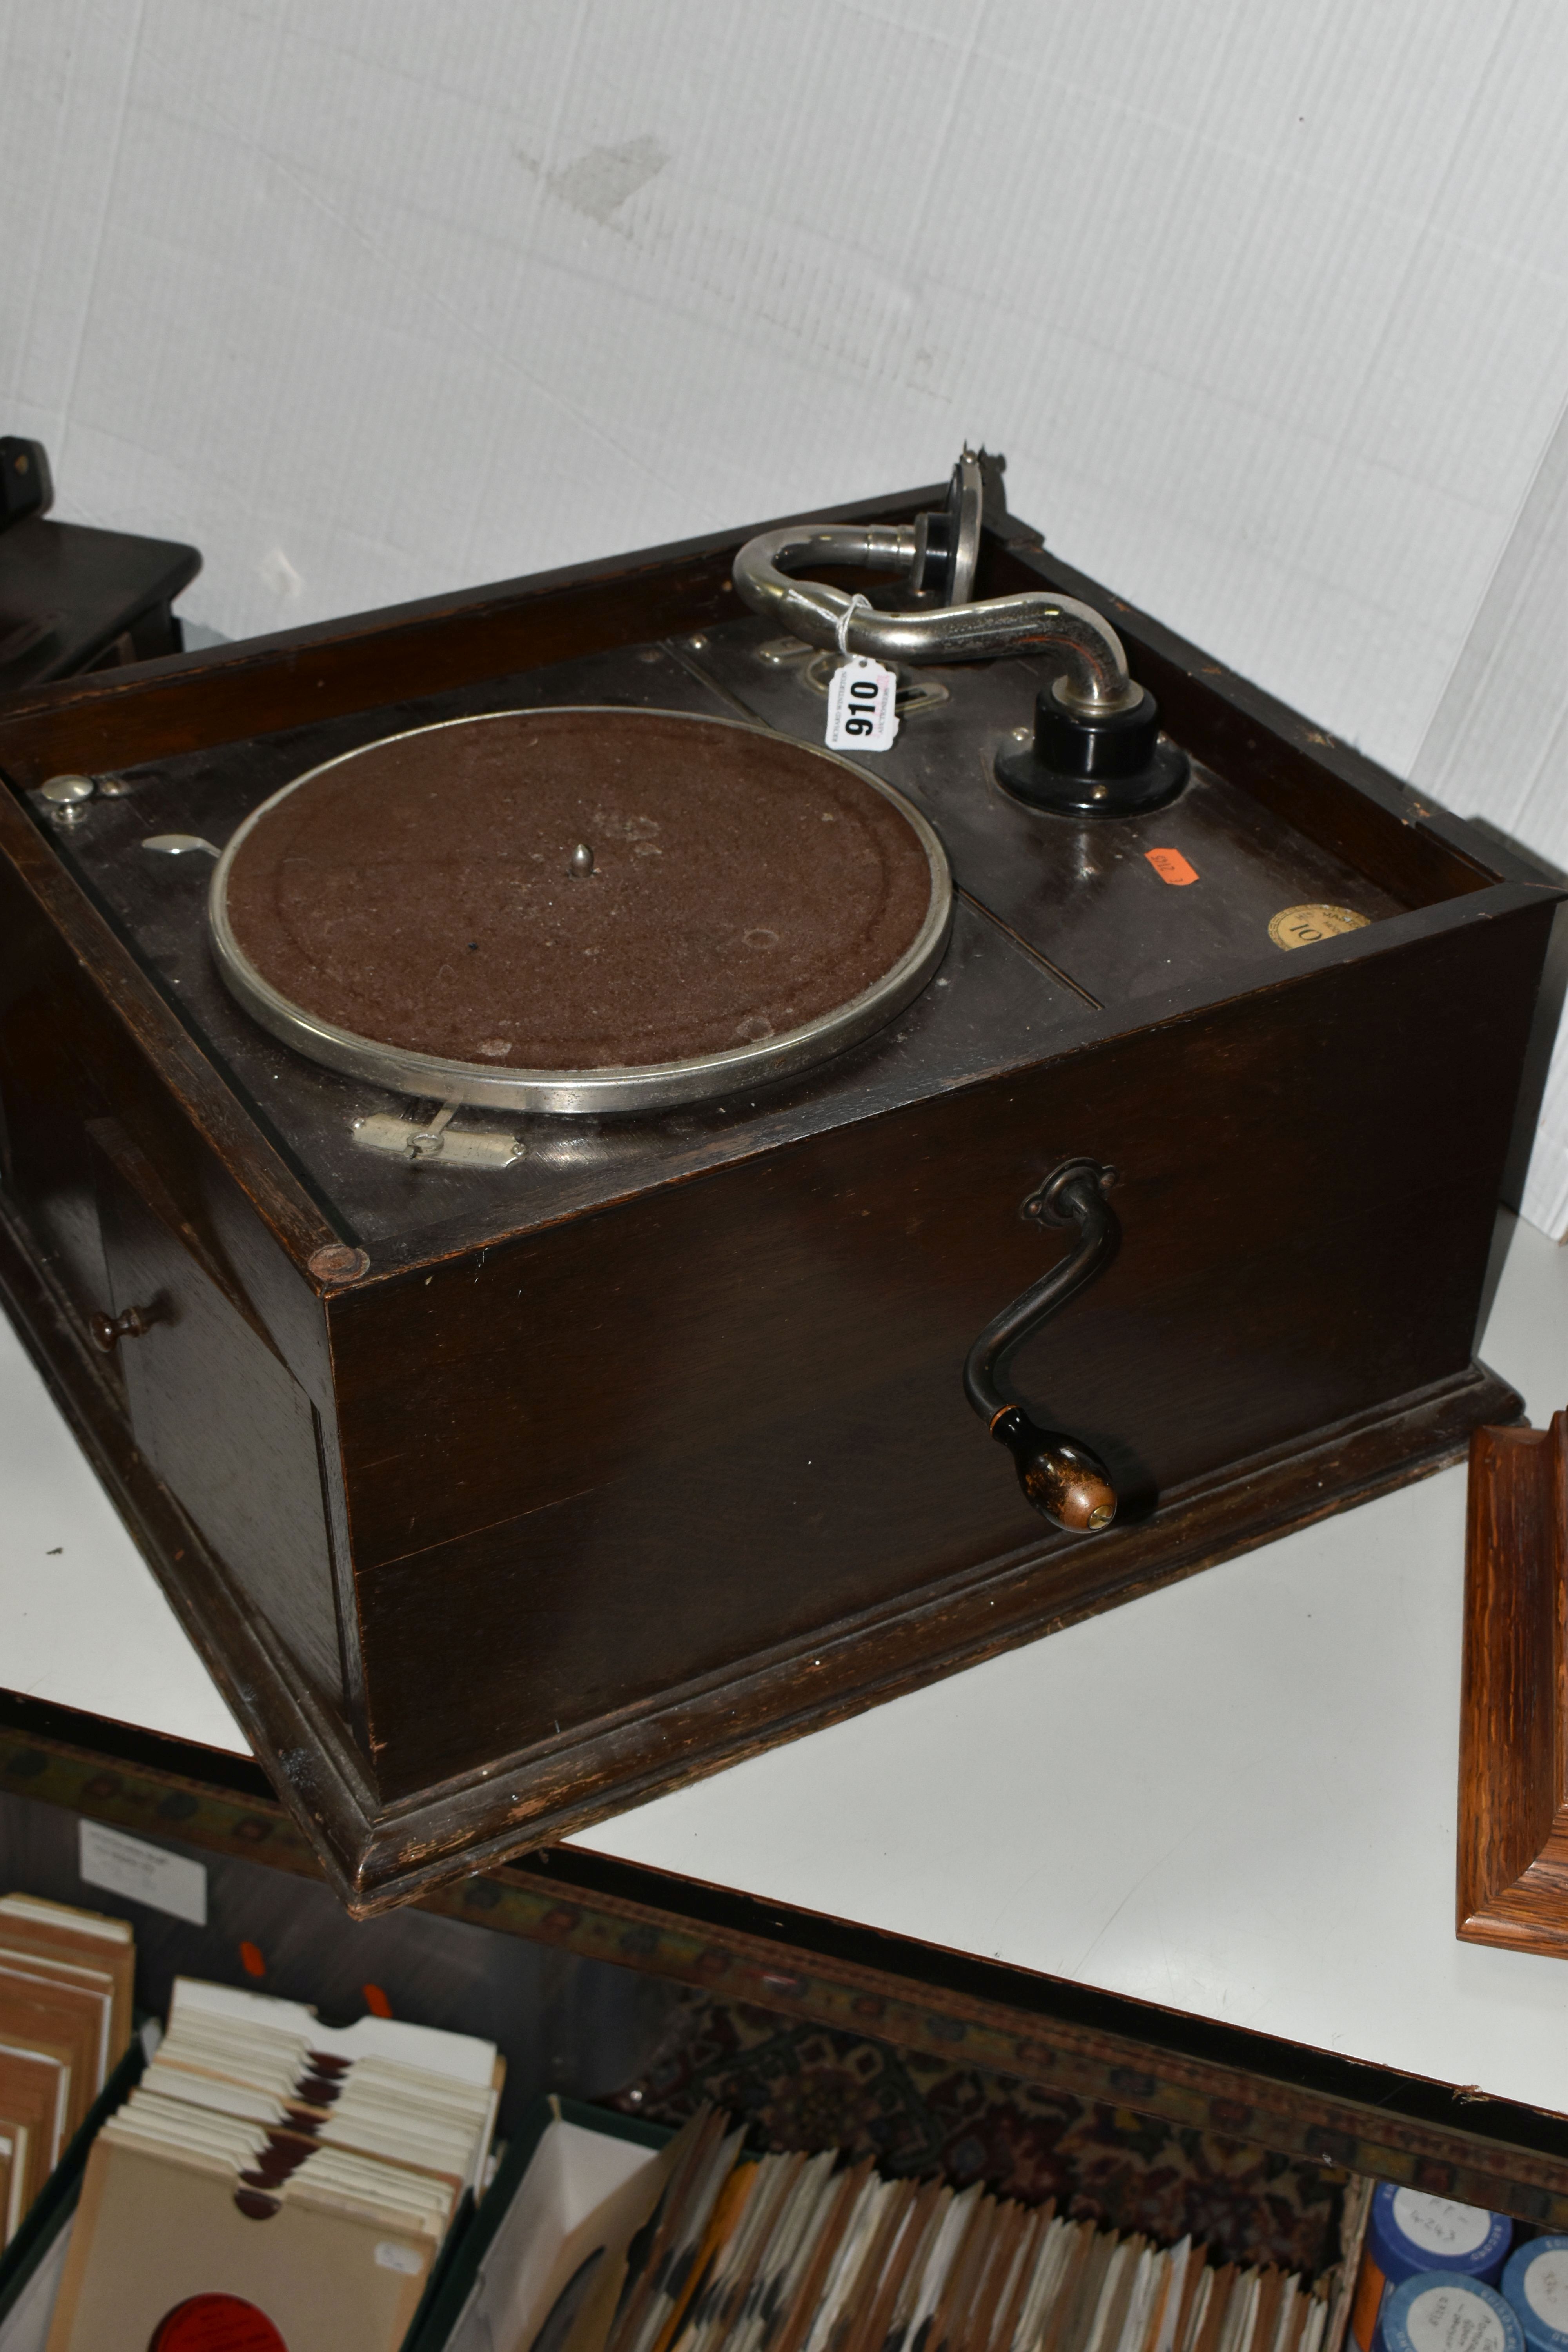 A HMV MODEL 103 GRAMOPHONE, lid is missing, runs when wound - Image 6 of 7